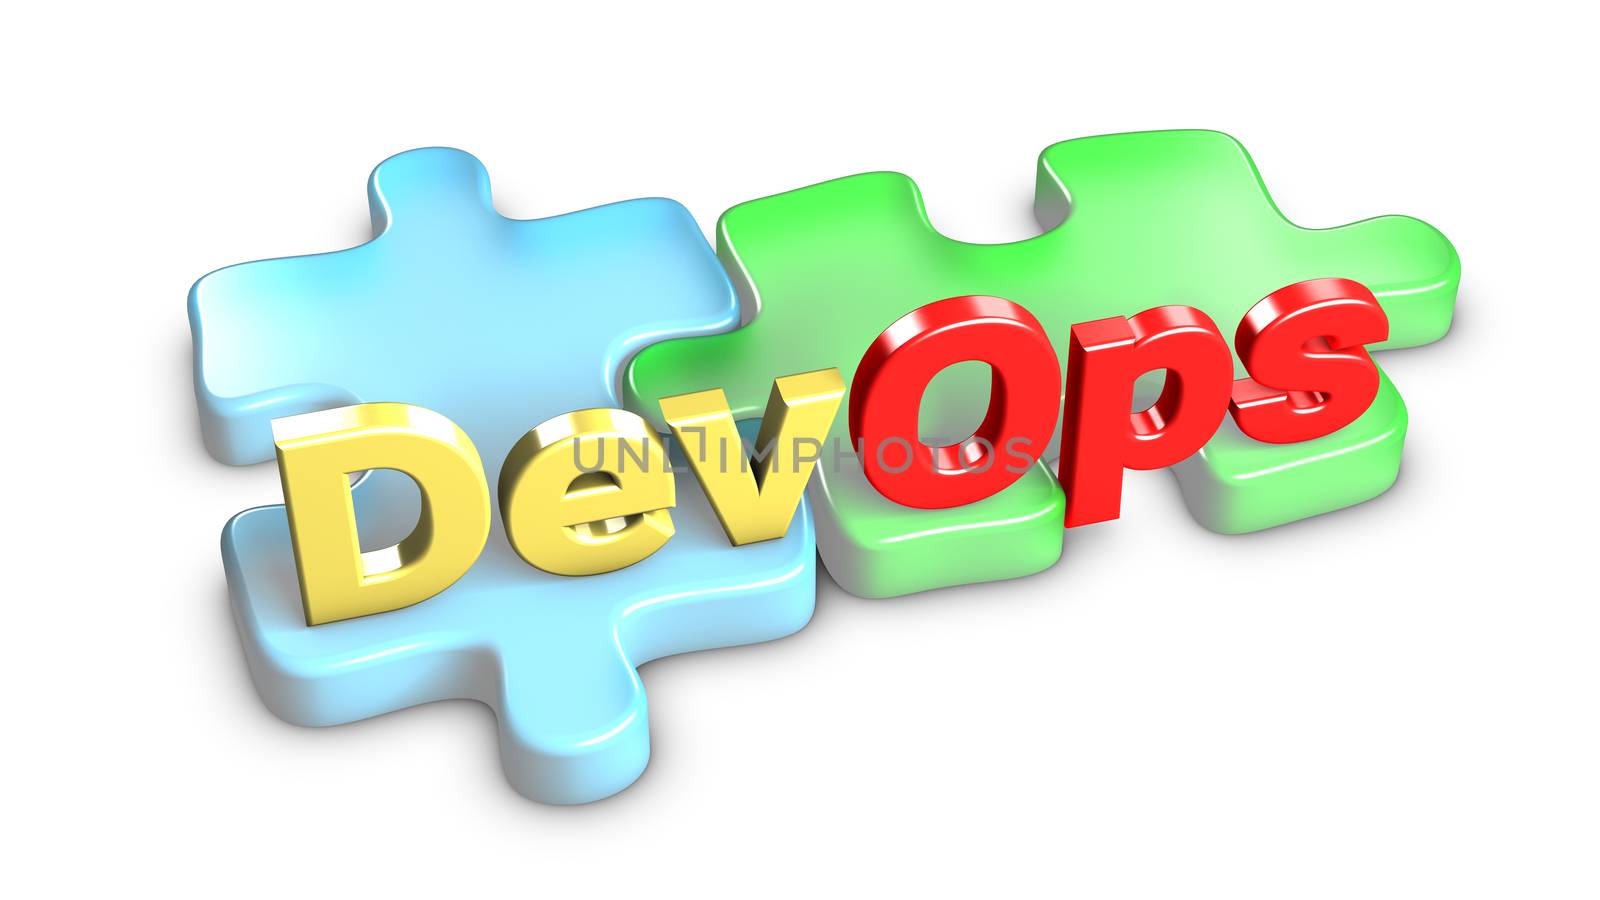 DevOps means development and operations. Each entity is a piece of the puzzle. 3d rendering.